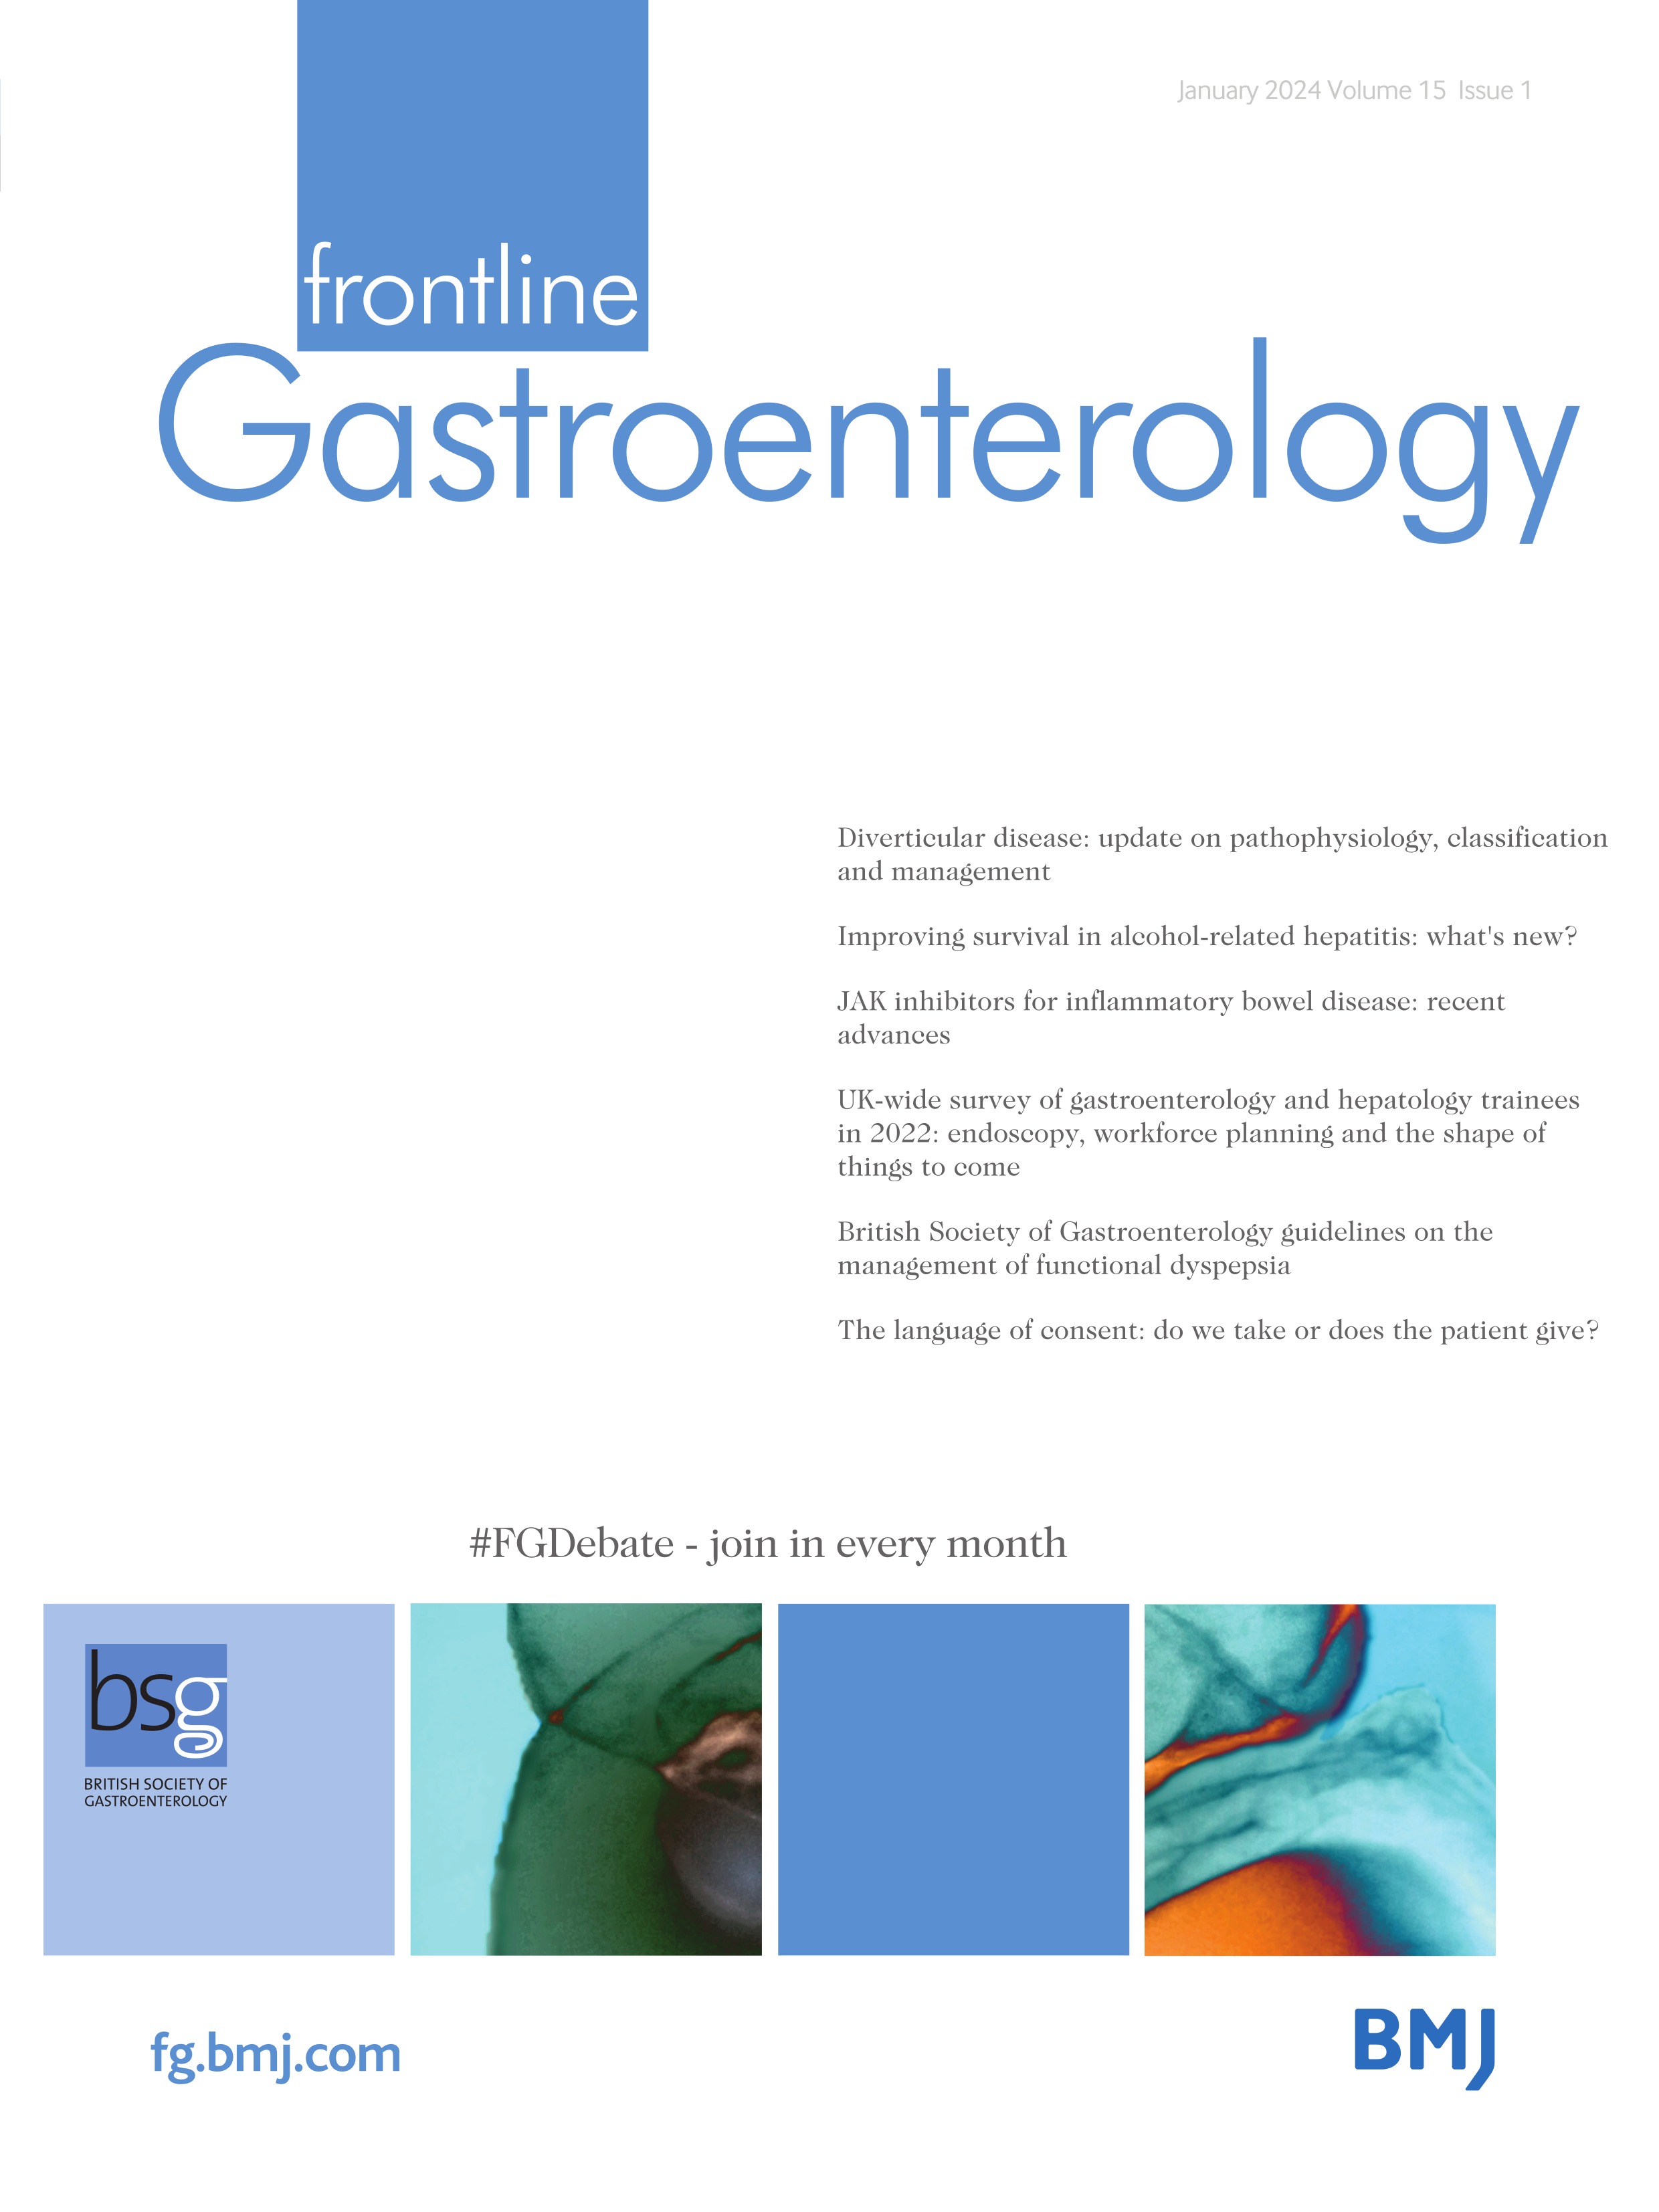 UK-wide survey of gastroenterology and hepatology trainees in 2022: endoscopy, workforce planning and the Shape of things to come